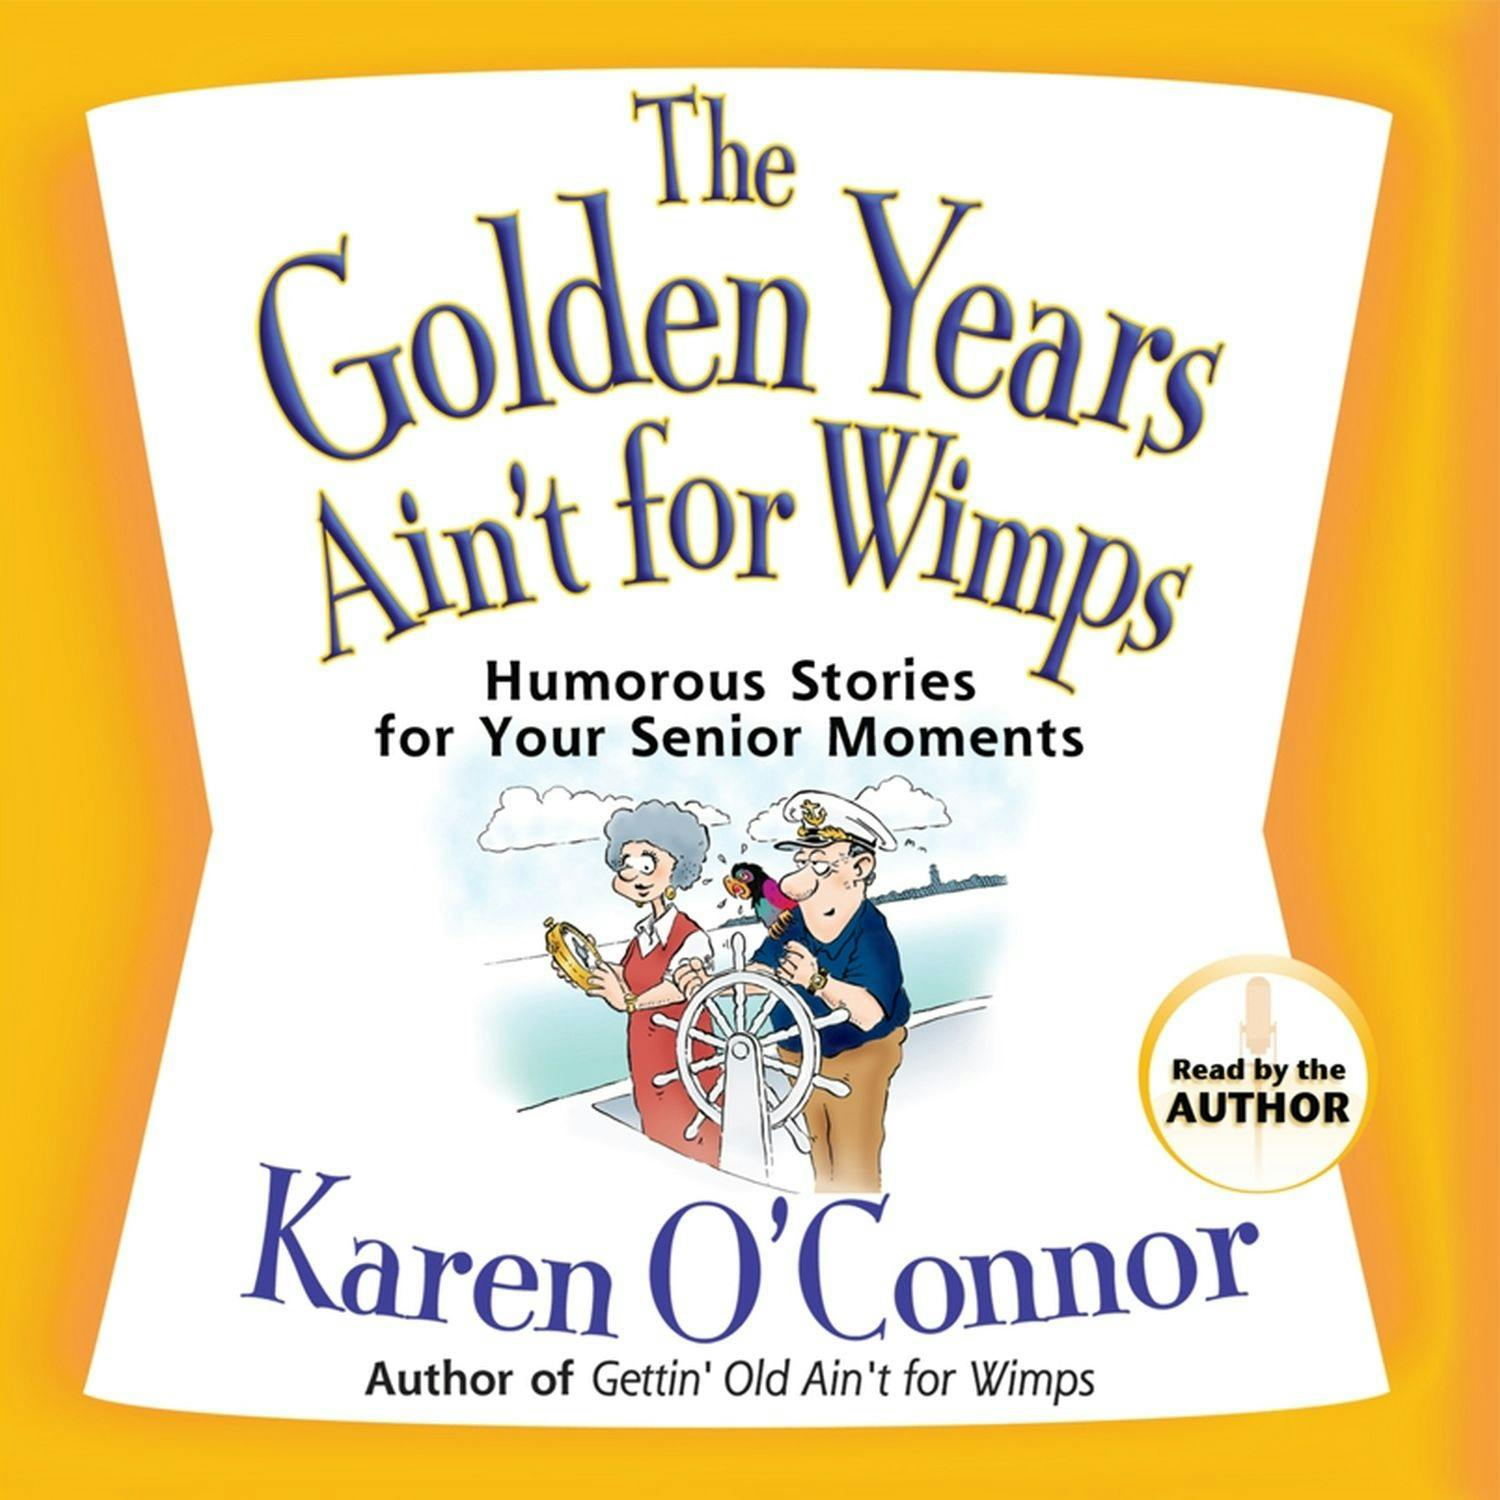 The Golden Years Ain't for Wimps: Humorous Stories for Your Senior Moments - Karen O'Connor